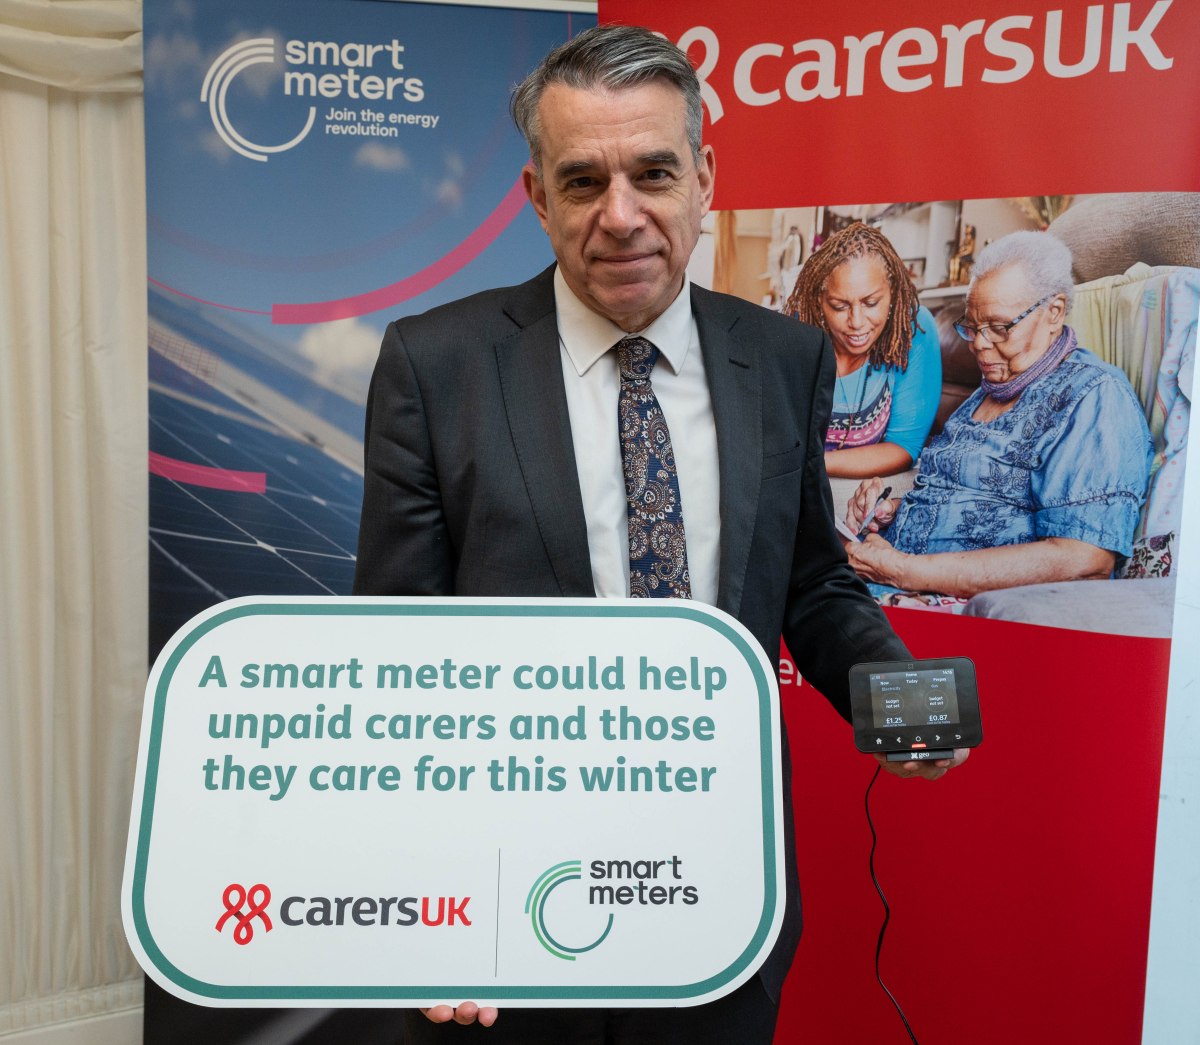 Jeff highlights support for unpaid carers